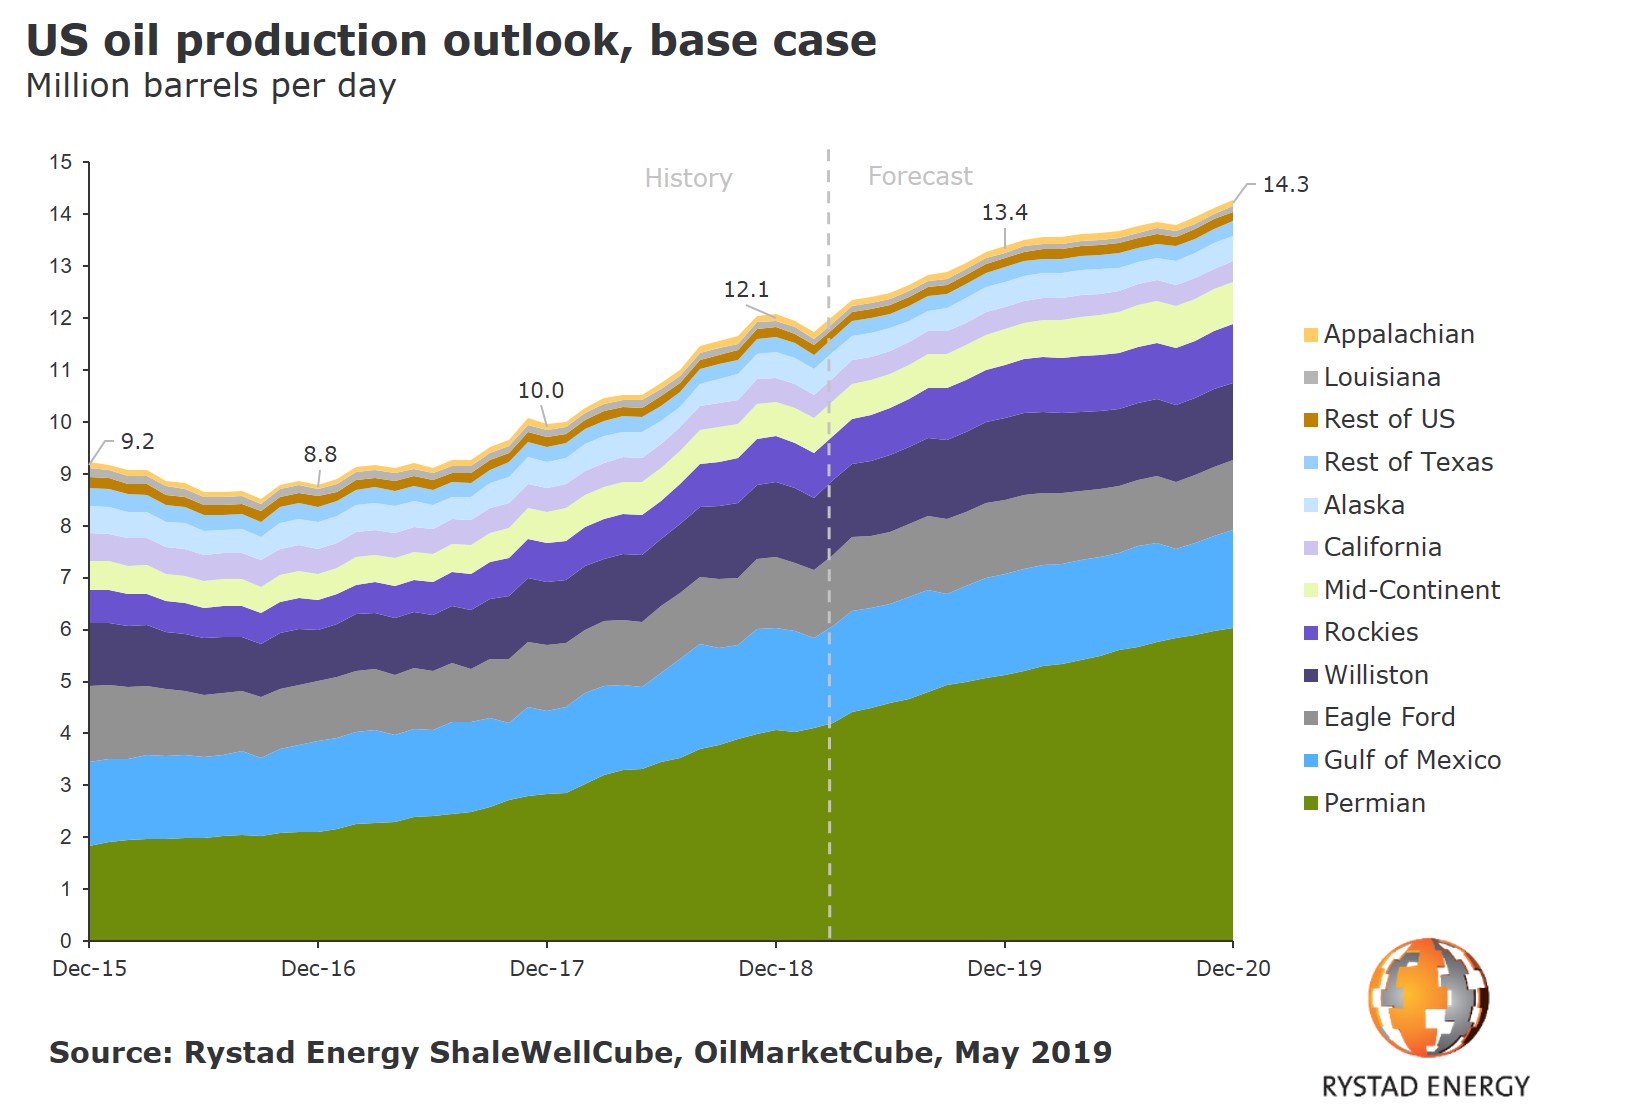 A graph showing the US oil production outlook, base case in Million barrels per day from Dec 2015 to Dec 2020. Source: Rystad Enrgy ShaleWellCube, OilMarketCube, May 2019